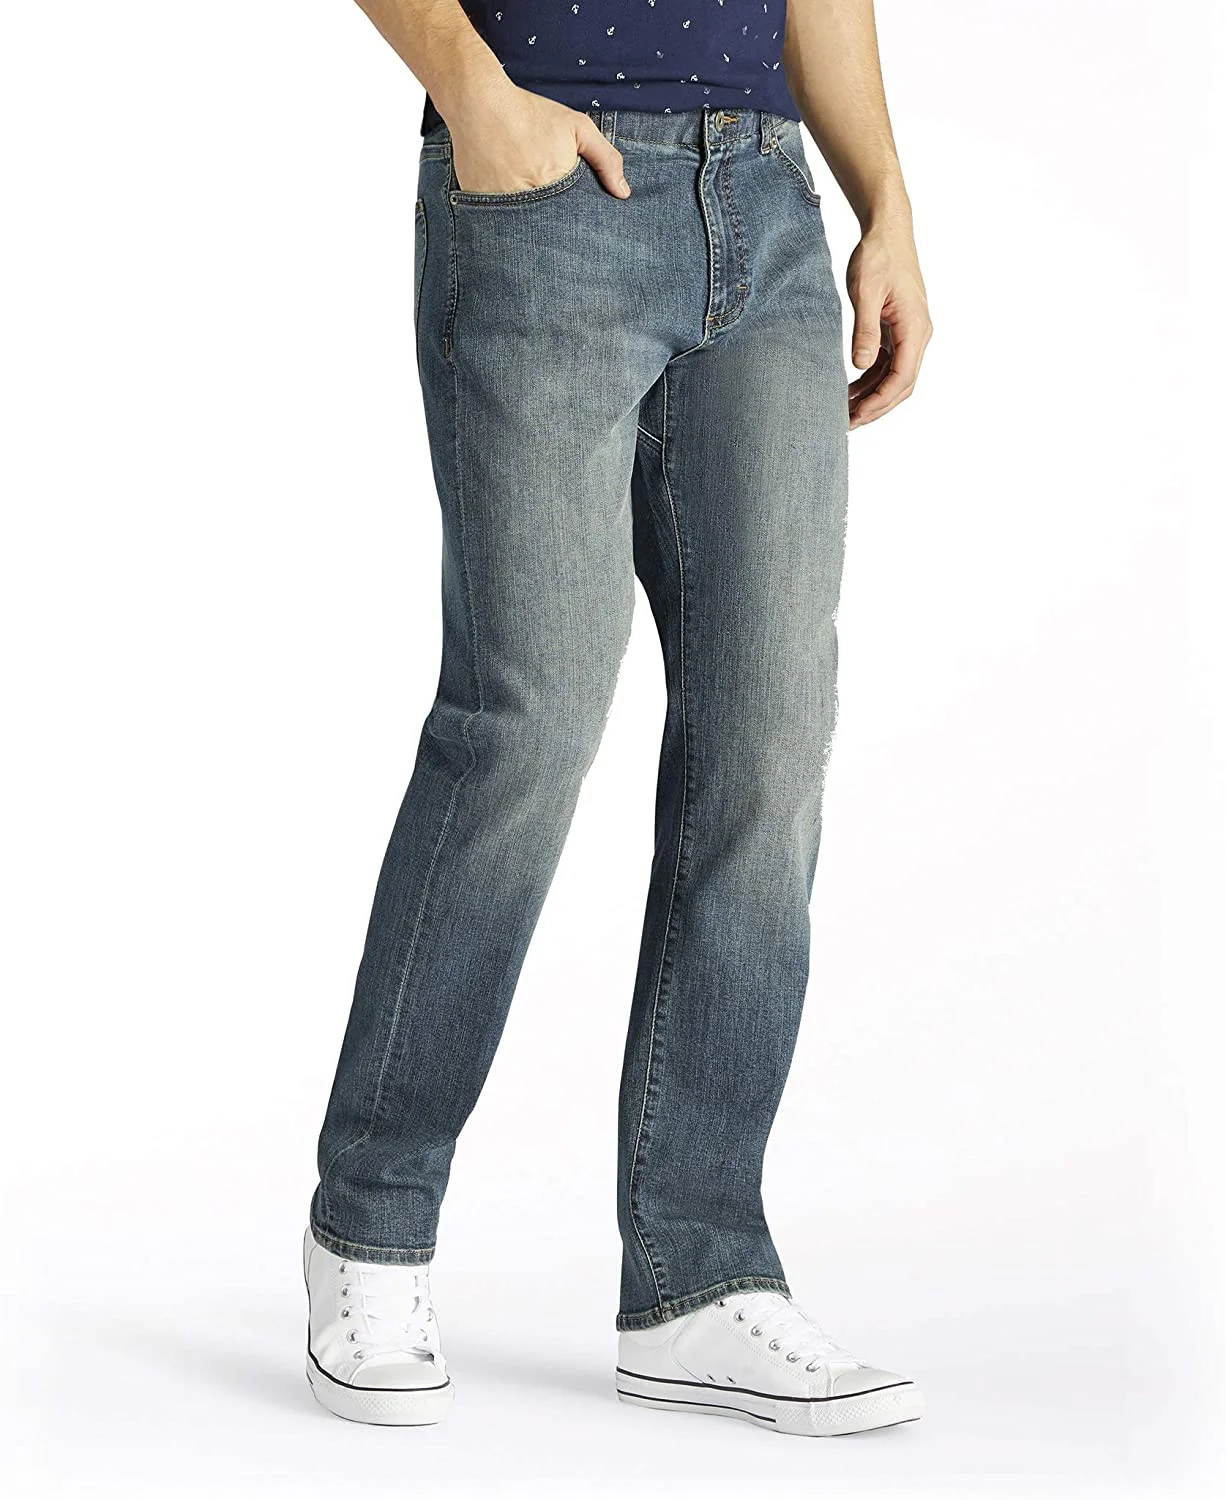 Mens Athletic Fit Tapered Leg Jean  from Bangladesh Manufacturer